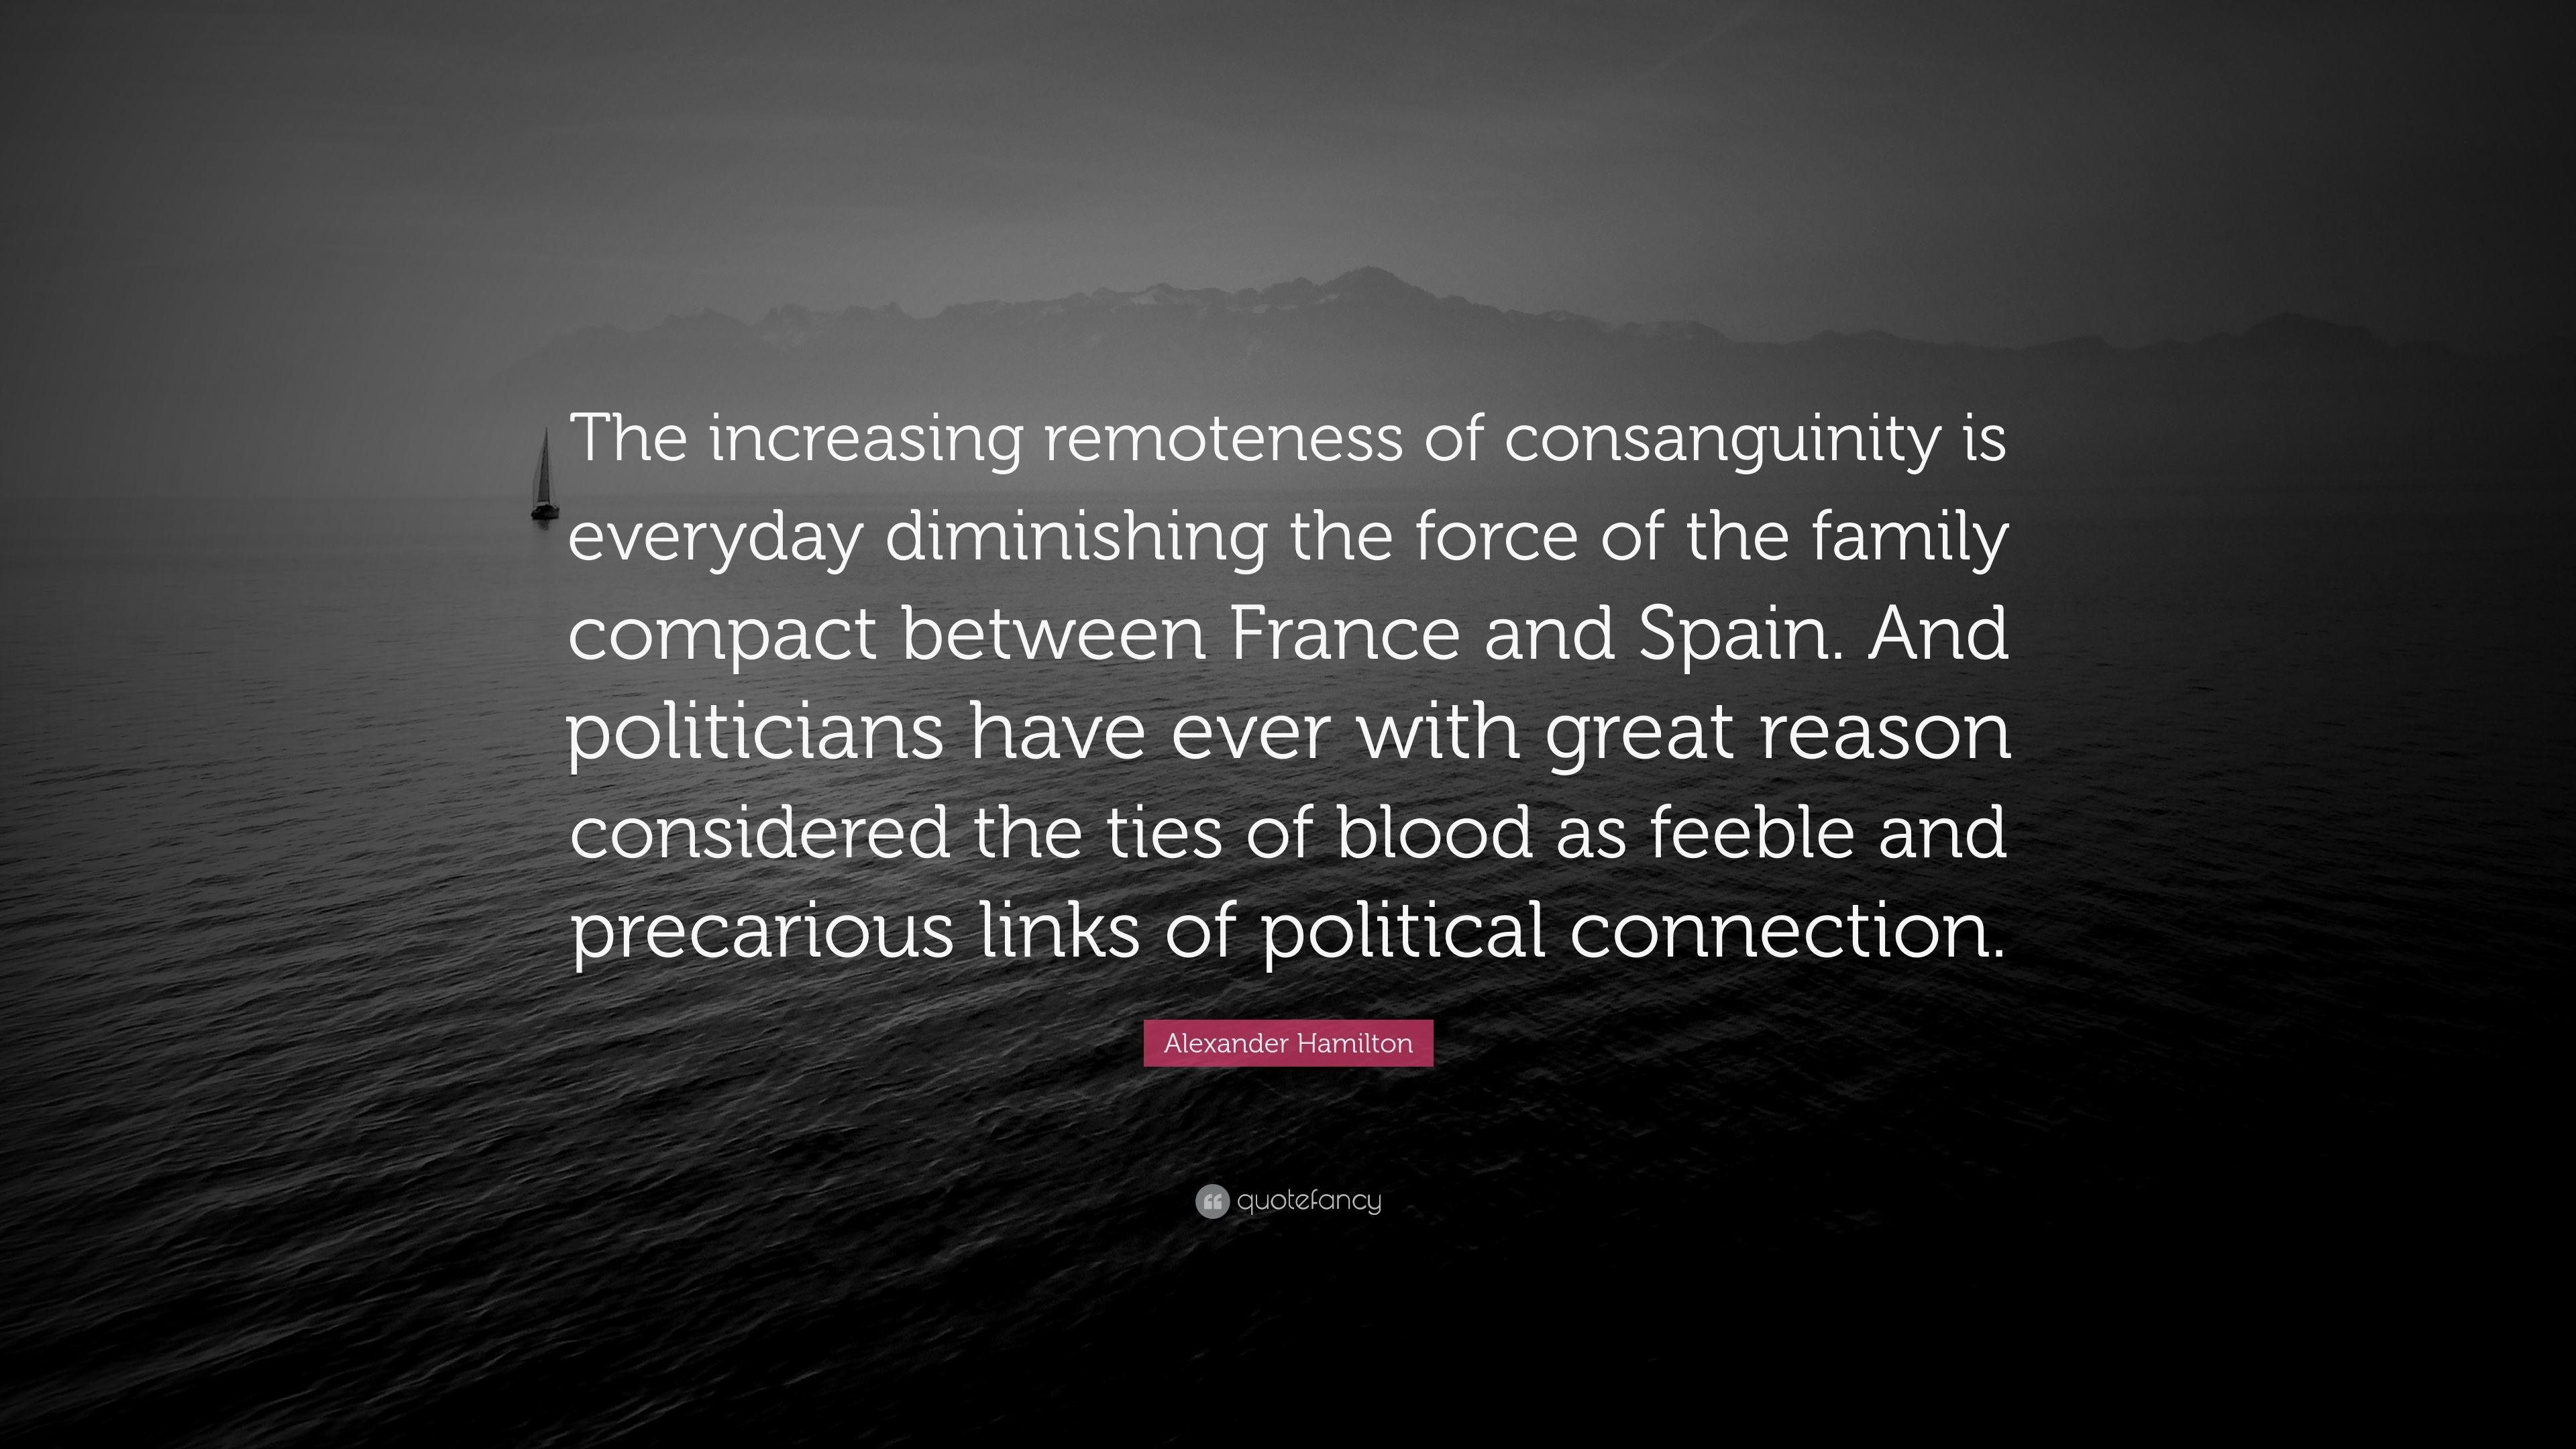 Alexander Hamilton Quote The increasing remoteness of consanguinity is everyday diminishing the force of